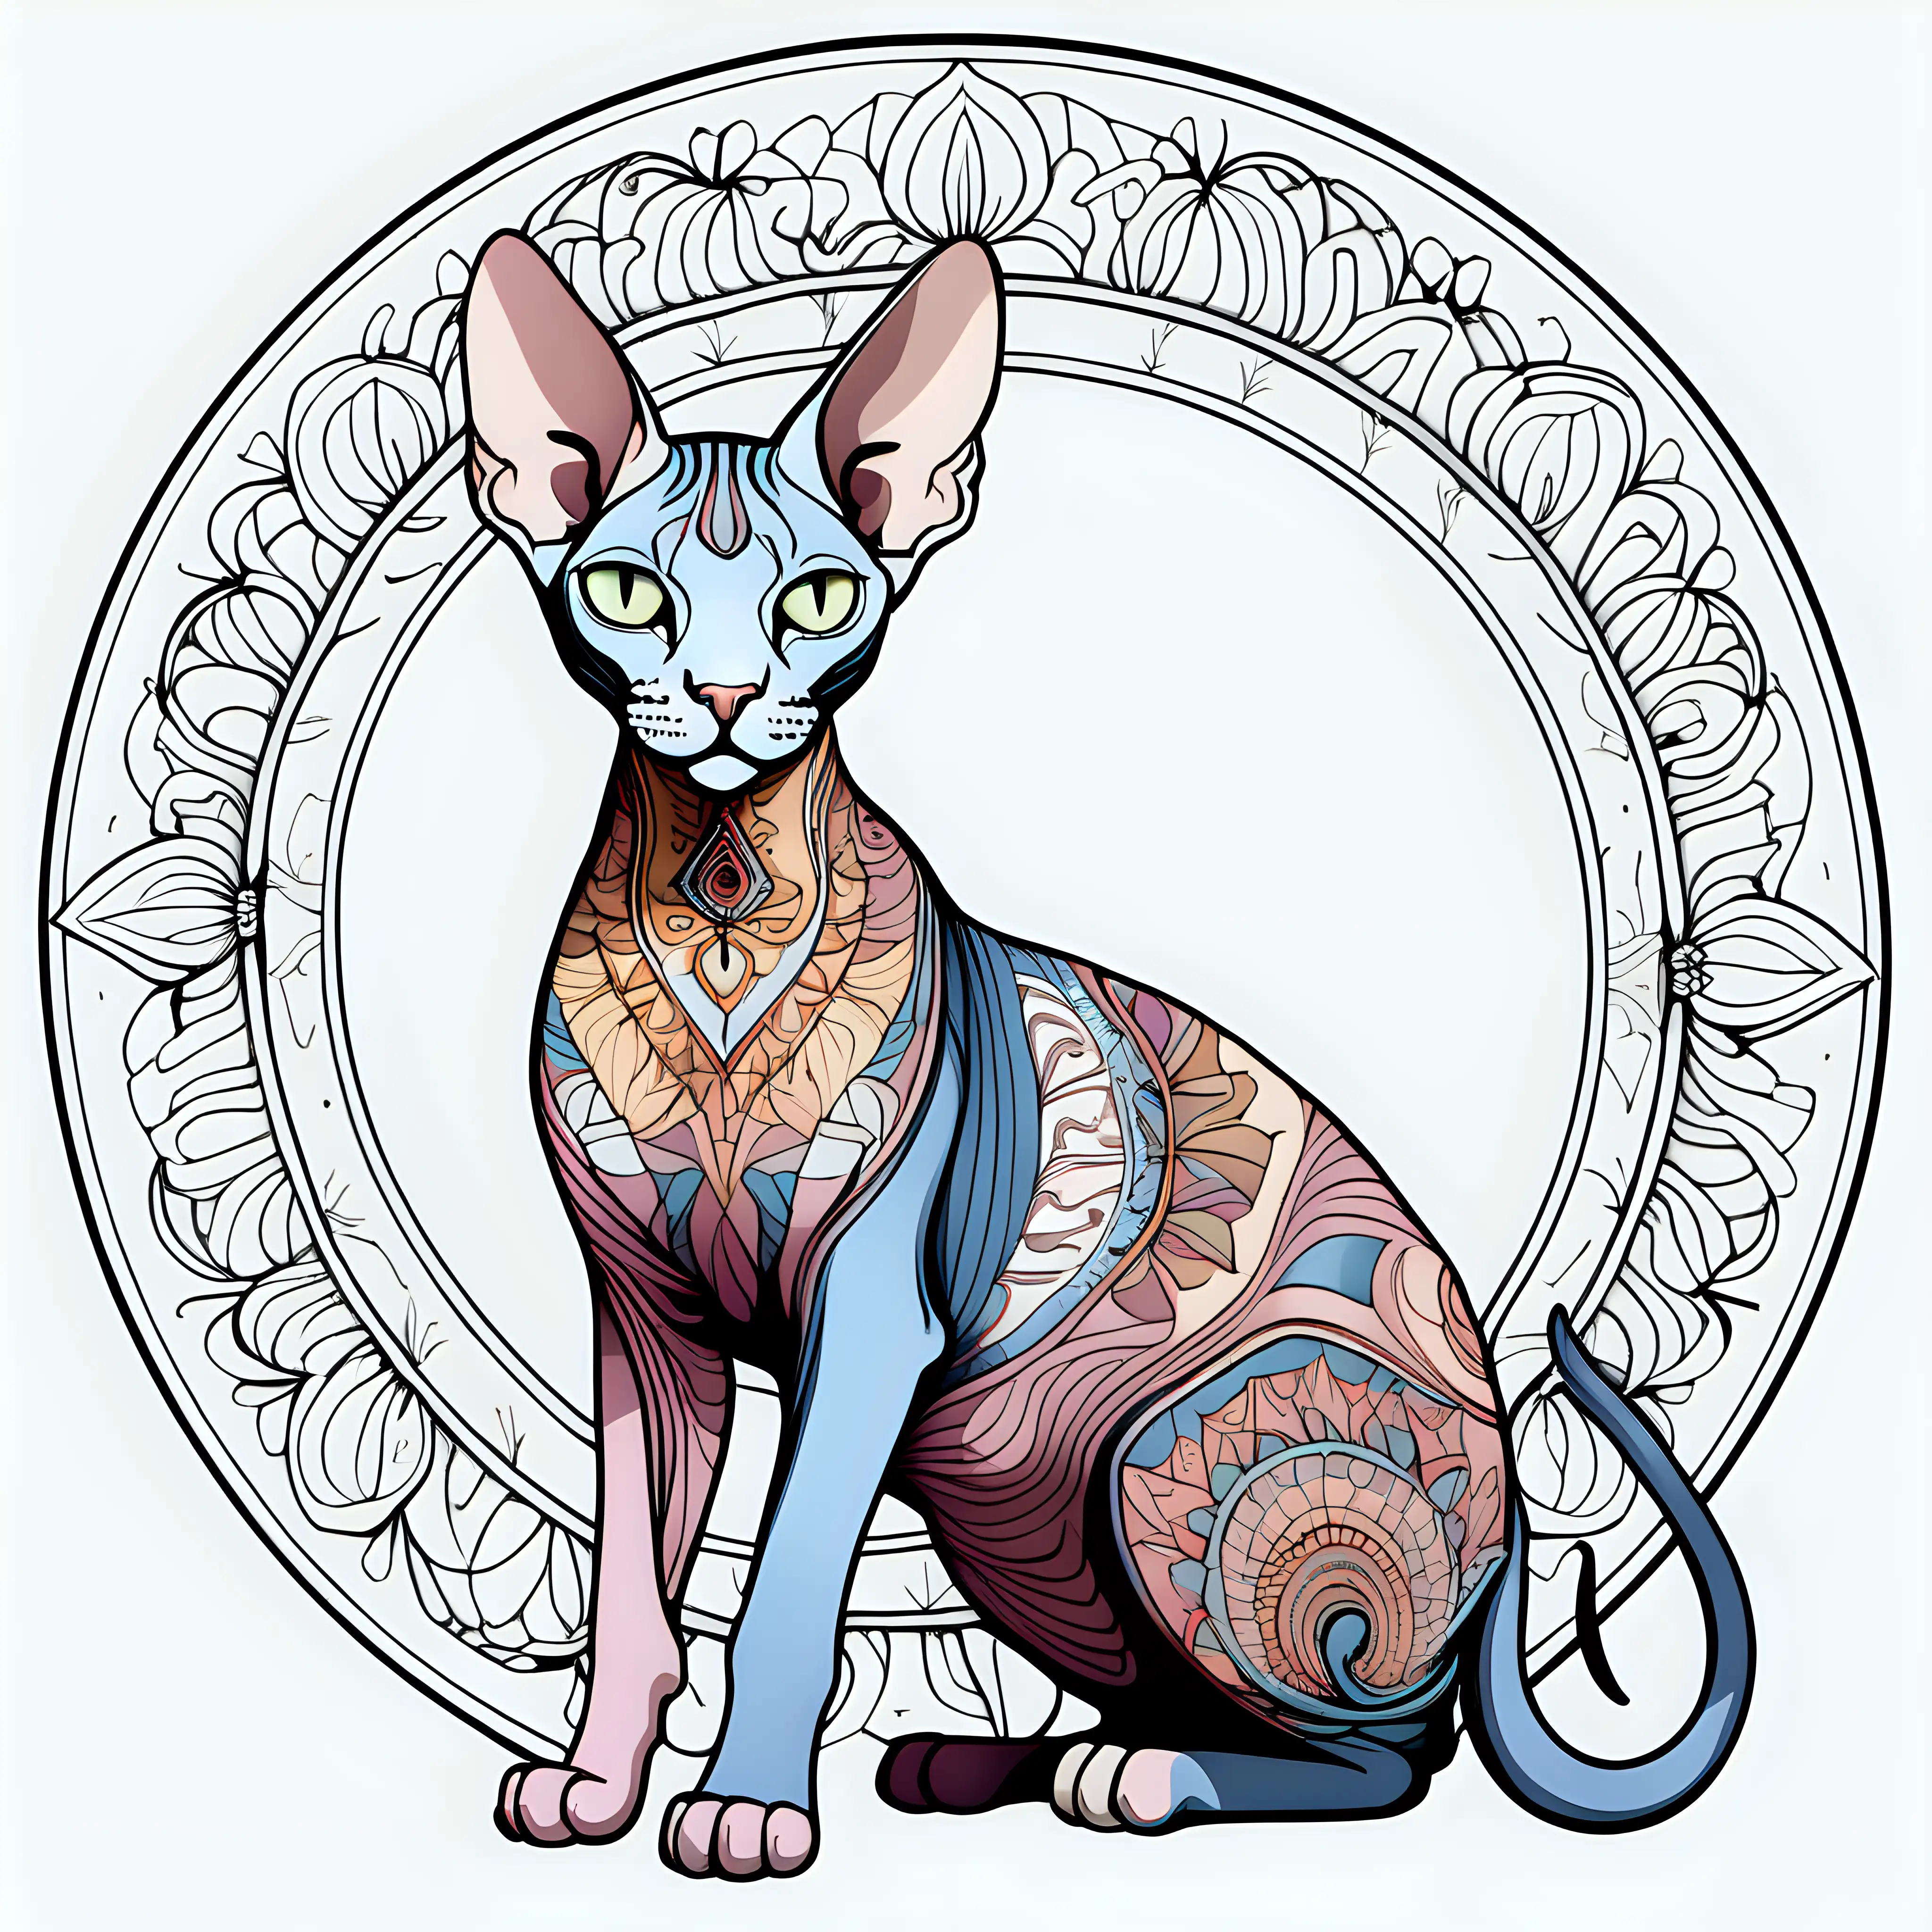 Sphynx Cat Mandala Intricately Designed Vector Artwork with Vibrant Colors on White Background